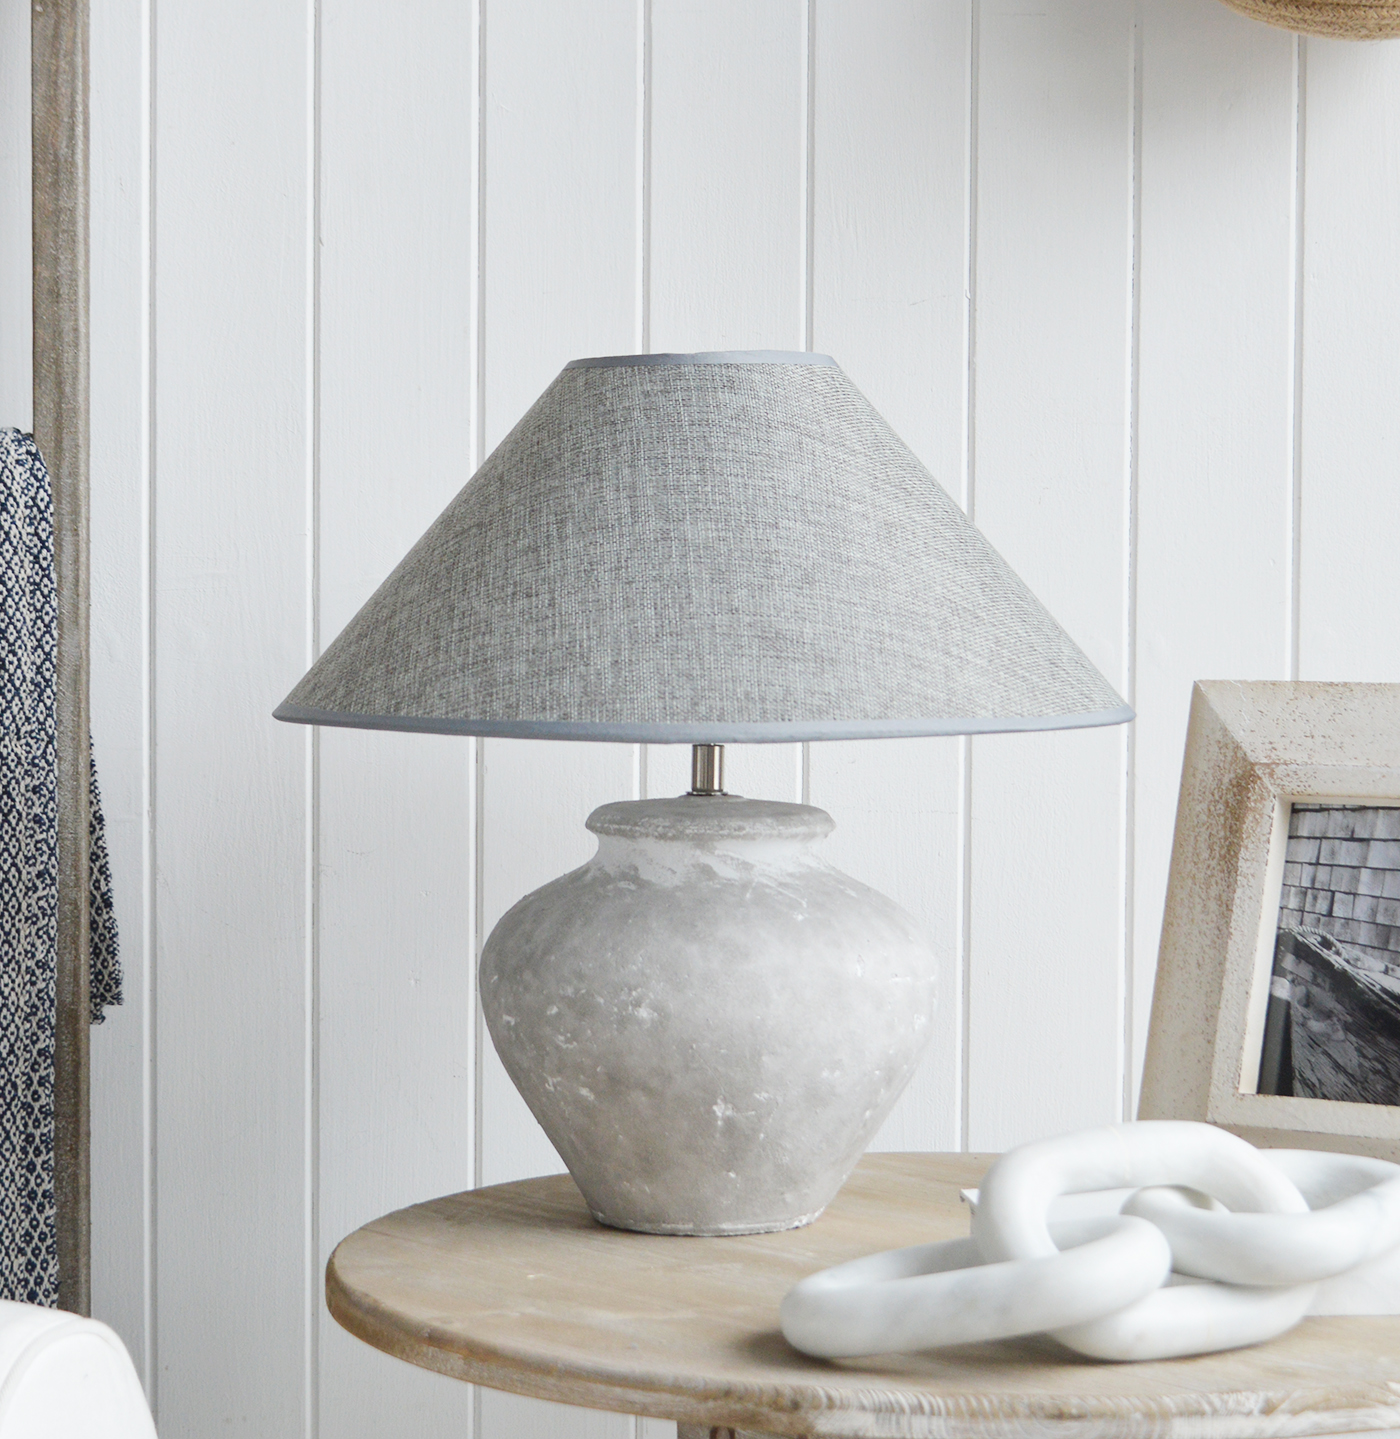 New England style lamps. Rockport Table Lamp - Coastal, Modern Farmhopuse and Country Furniture and Interiors